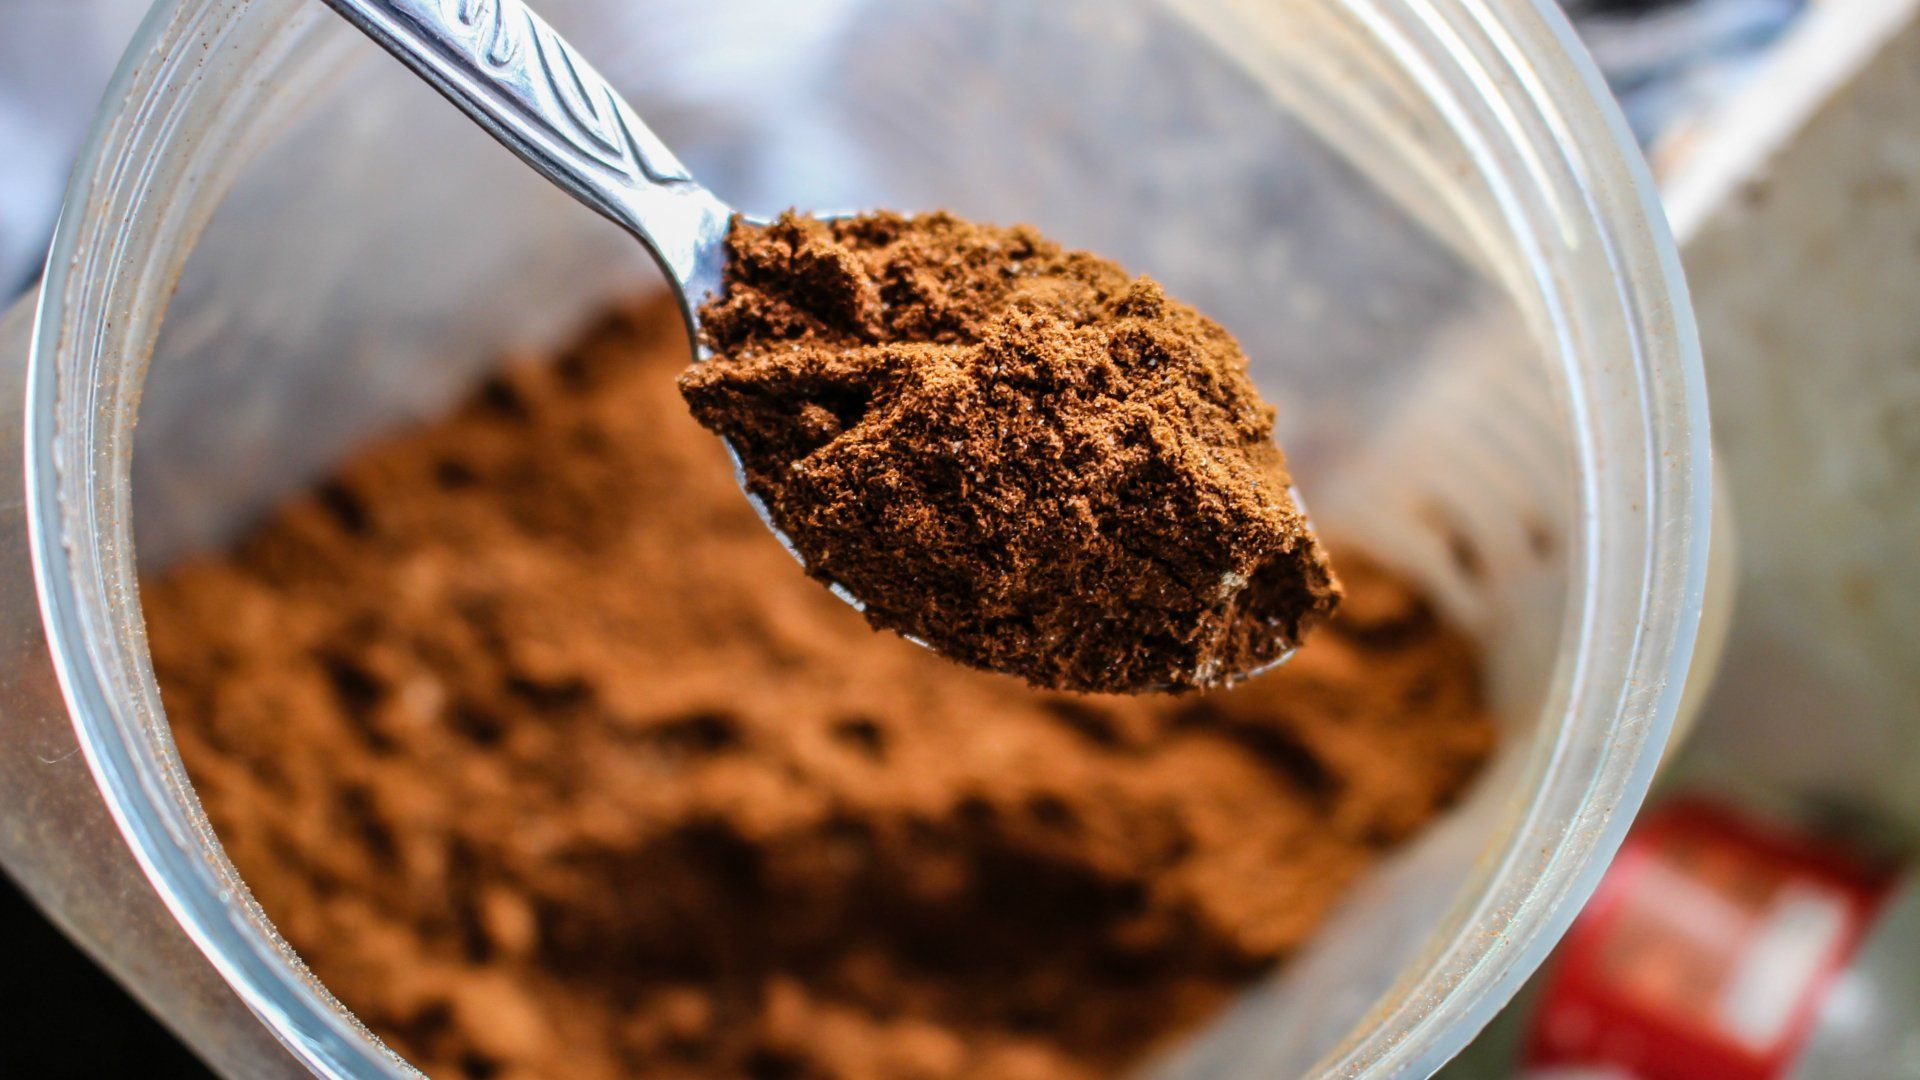 A spoon is scooping cocoa powder out of a plastic container.